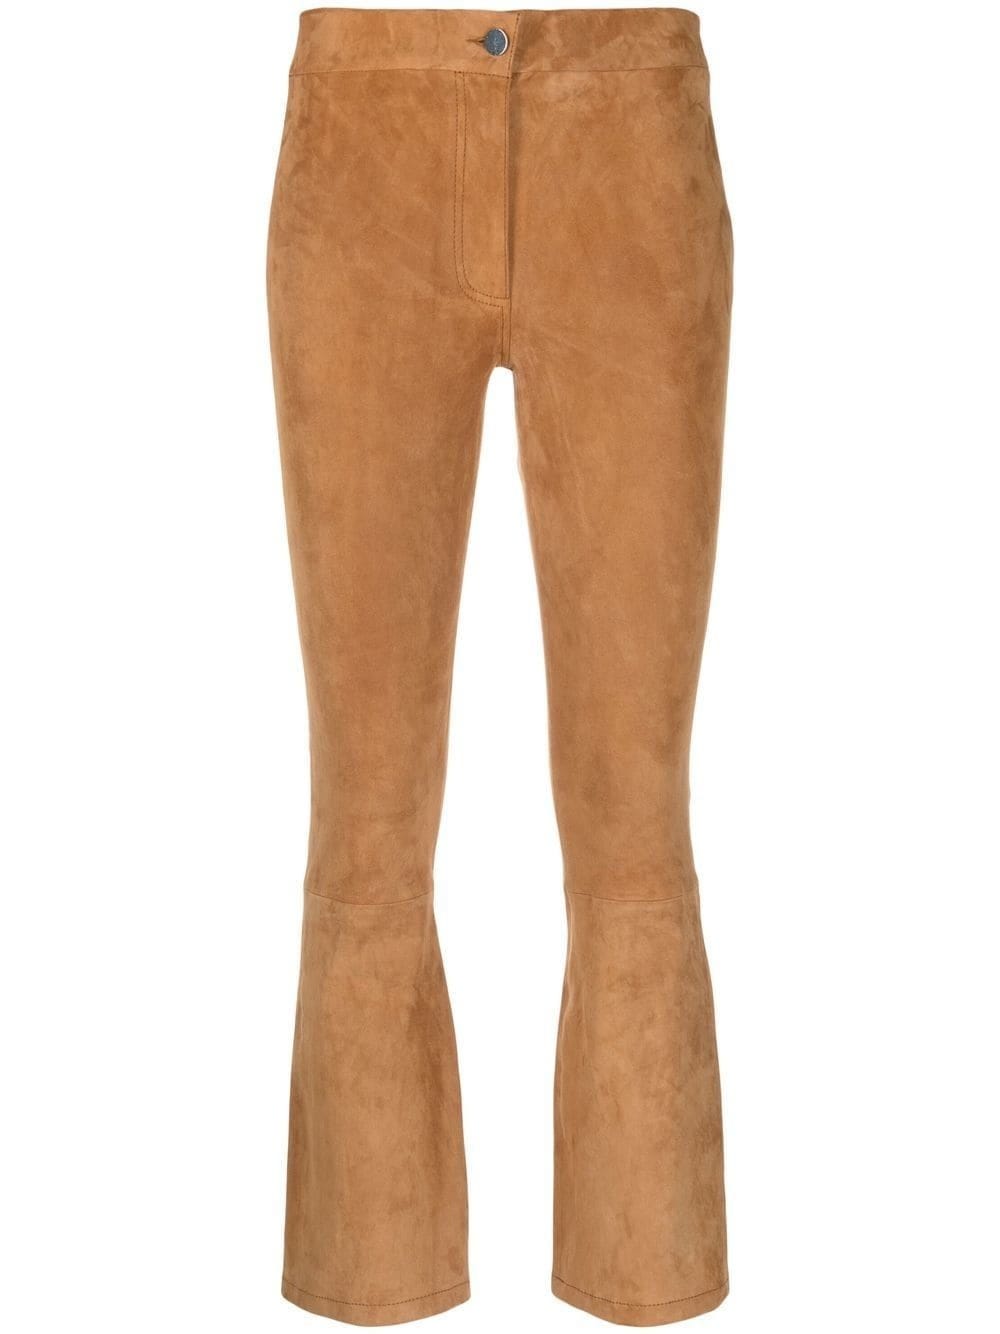 ARMA BROWN SUEDE FLARED CROP TROUSERS